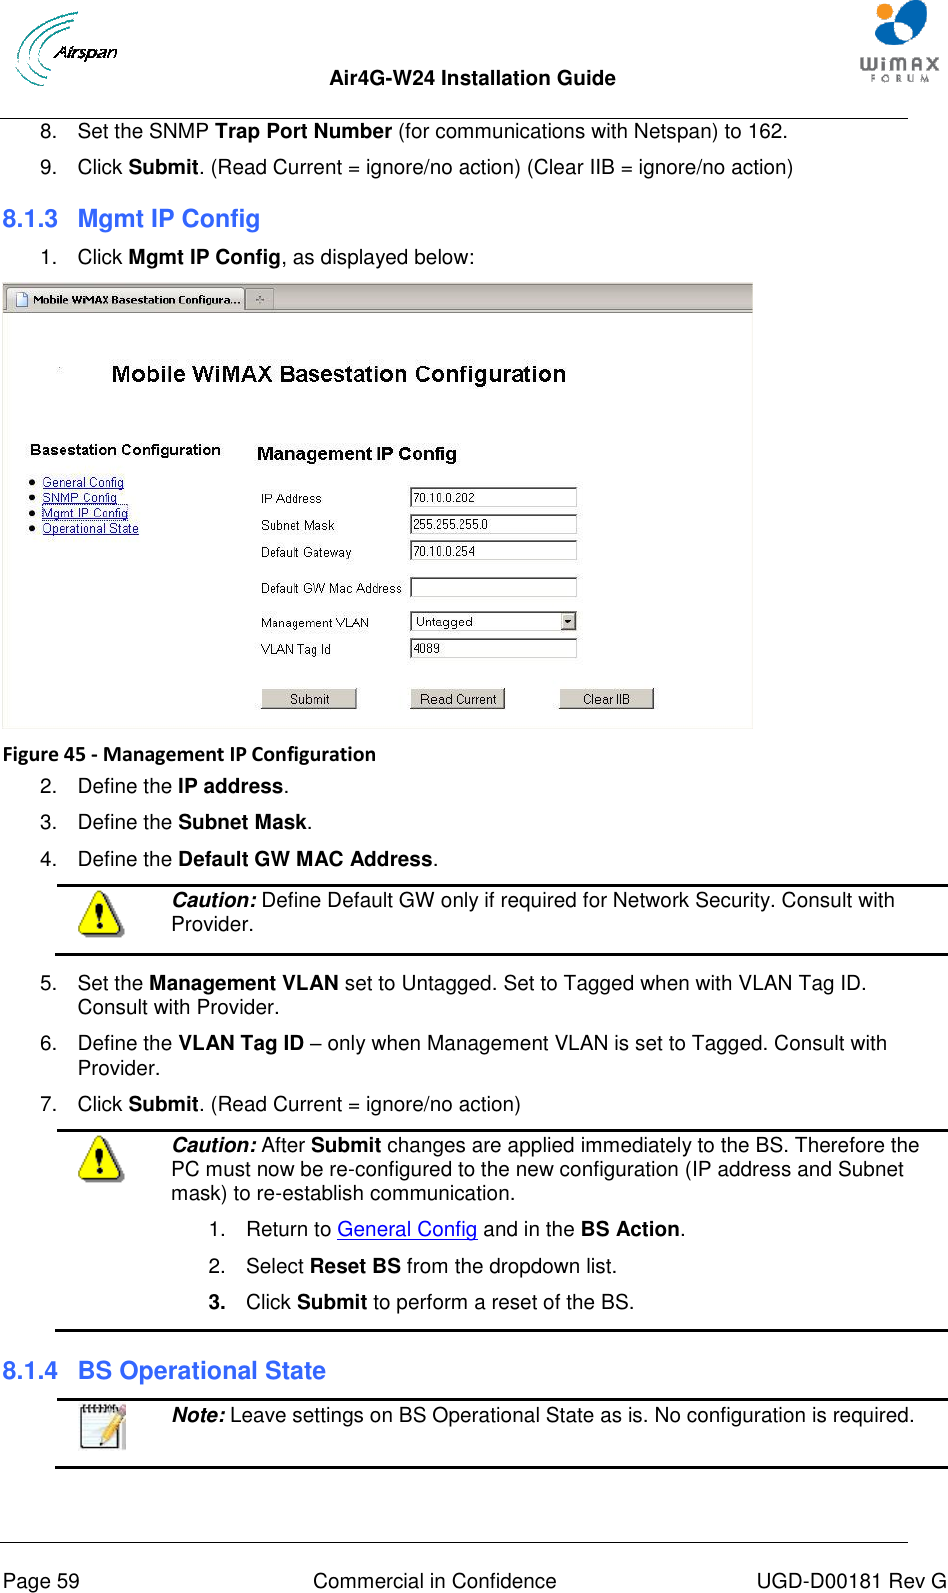  Air4G-W24 Installation Guide       Page 59  Commercial in Confidence  UGD-D00181 Rev G 8.  Set the SNMP Trap Port Number (for communications with Netspan) to 162. 9.  Click Submit. (Read Current = ignore/no action) (Clear IIB = ignore/no action) 8.1.3  Mgmt IP Config 1.  Click Mgmt IP Config, as displayed below:  Figure 45 - Management IP Configuration 2.  Define the IP address. 3.  Define the Subnet Mask. 4.  Define the Default GW MAC Address.  Caution: Define Default GW only if required for Network Security. Consult with Provider.  5.  Set the Management VLAN set to Untagged. Set to Tagged when with VLAN Tag ID. Consult with Provider. 6.  Define the VLAN Tag ID – only when Management VLAN is set to Tagged. Consult with Provider. 7.  Click Submit. (Read Current = ignore/no action)  Caution: After Submit changes are applied immediately to the BS. Therefore the PC must now be re-configured to the new configuration (IP address and Subnet mask) to re-establish communication.  1.  Return to General Config and in the BS Action.  2.  Select Reset BS from the dropdown list.  3.  Click Submit to perform a reset of the BS. 8.1.4  BS Operational State   Note: Leave settings on BS Operational State as is. No configuration is required. 